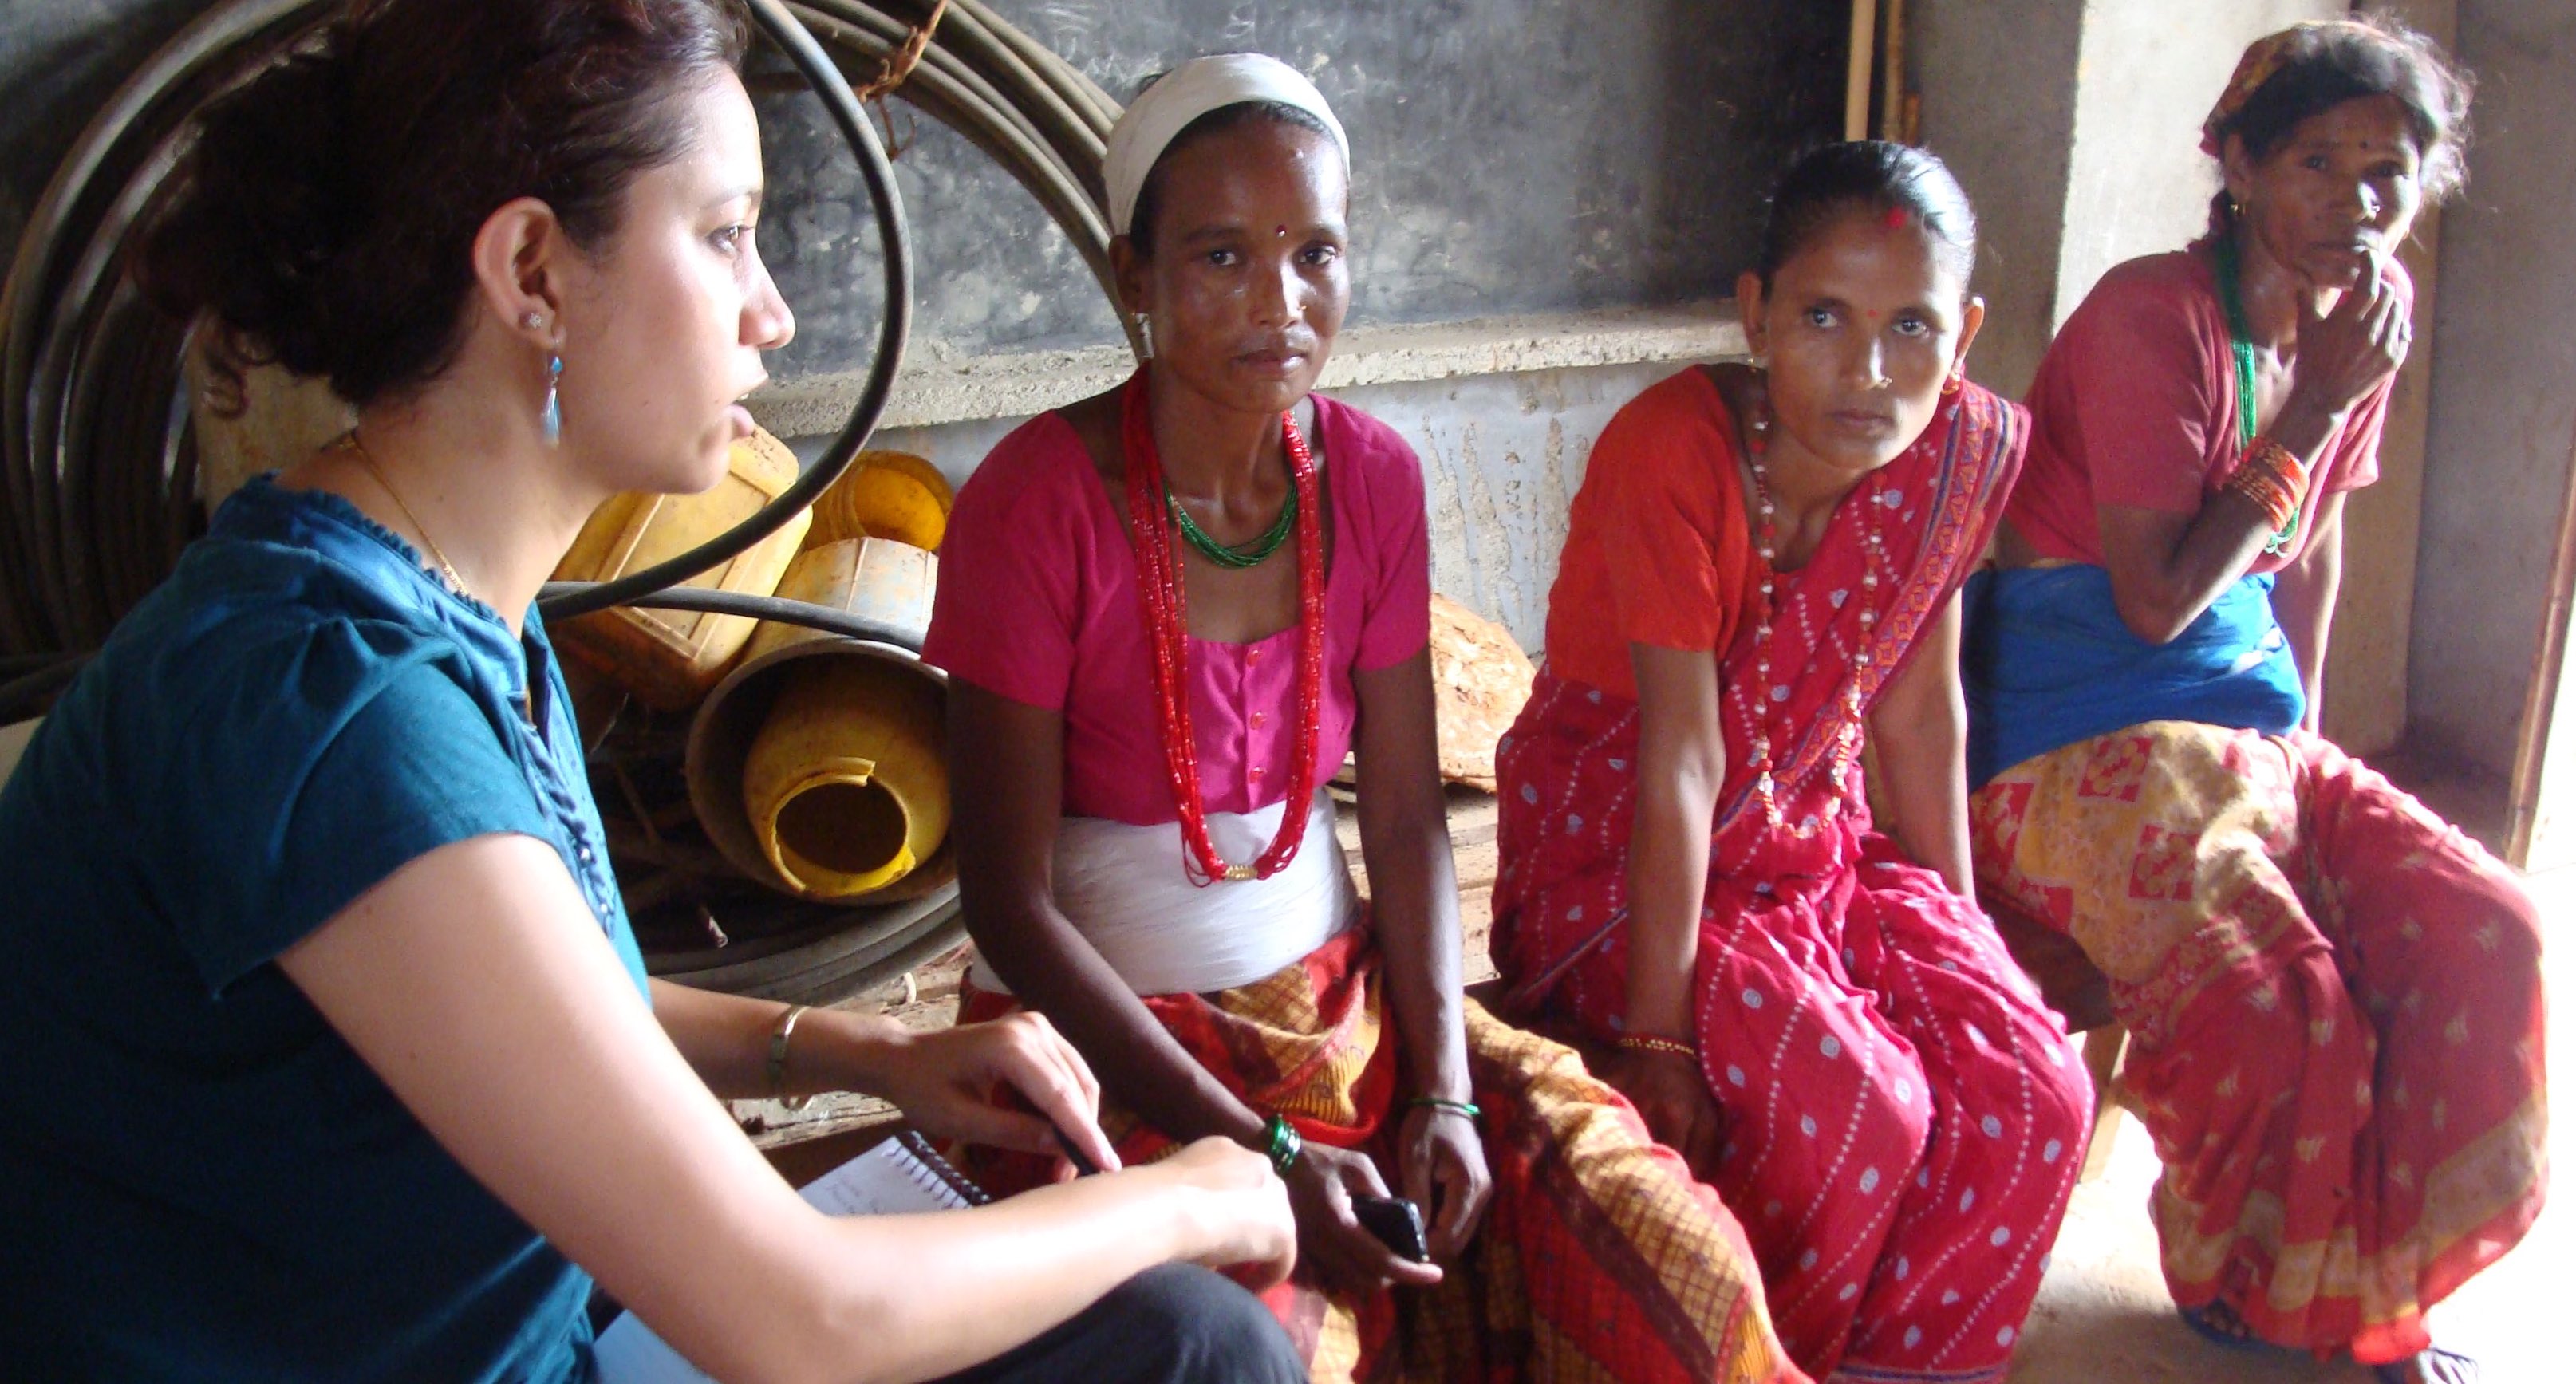 Researcher visiting with Nepalese women